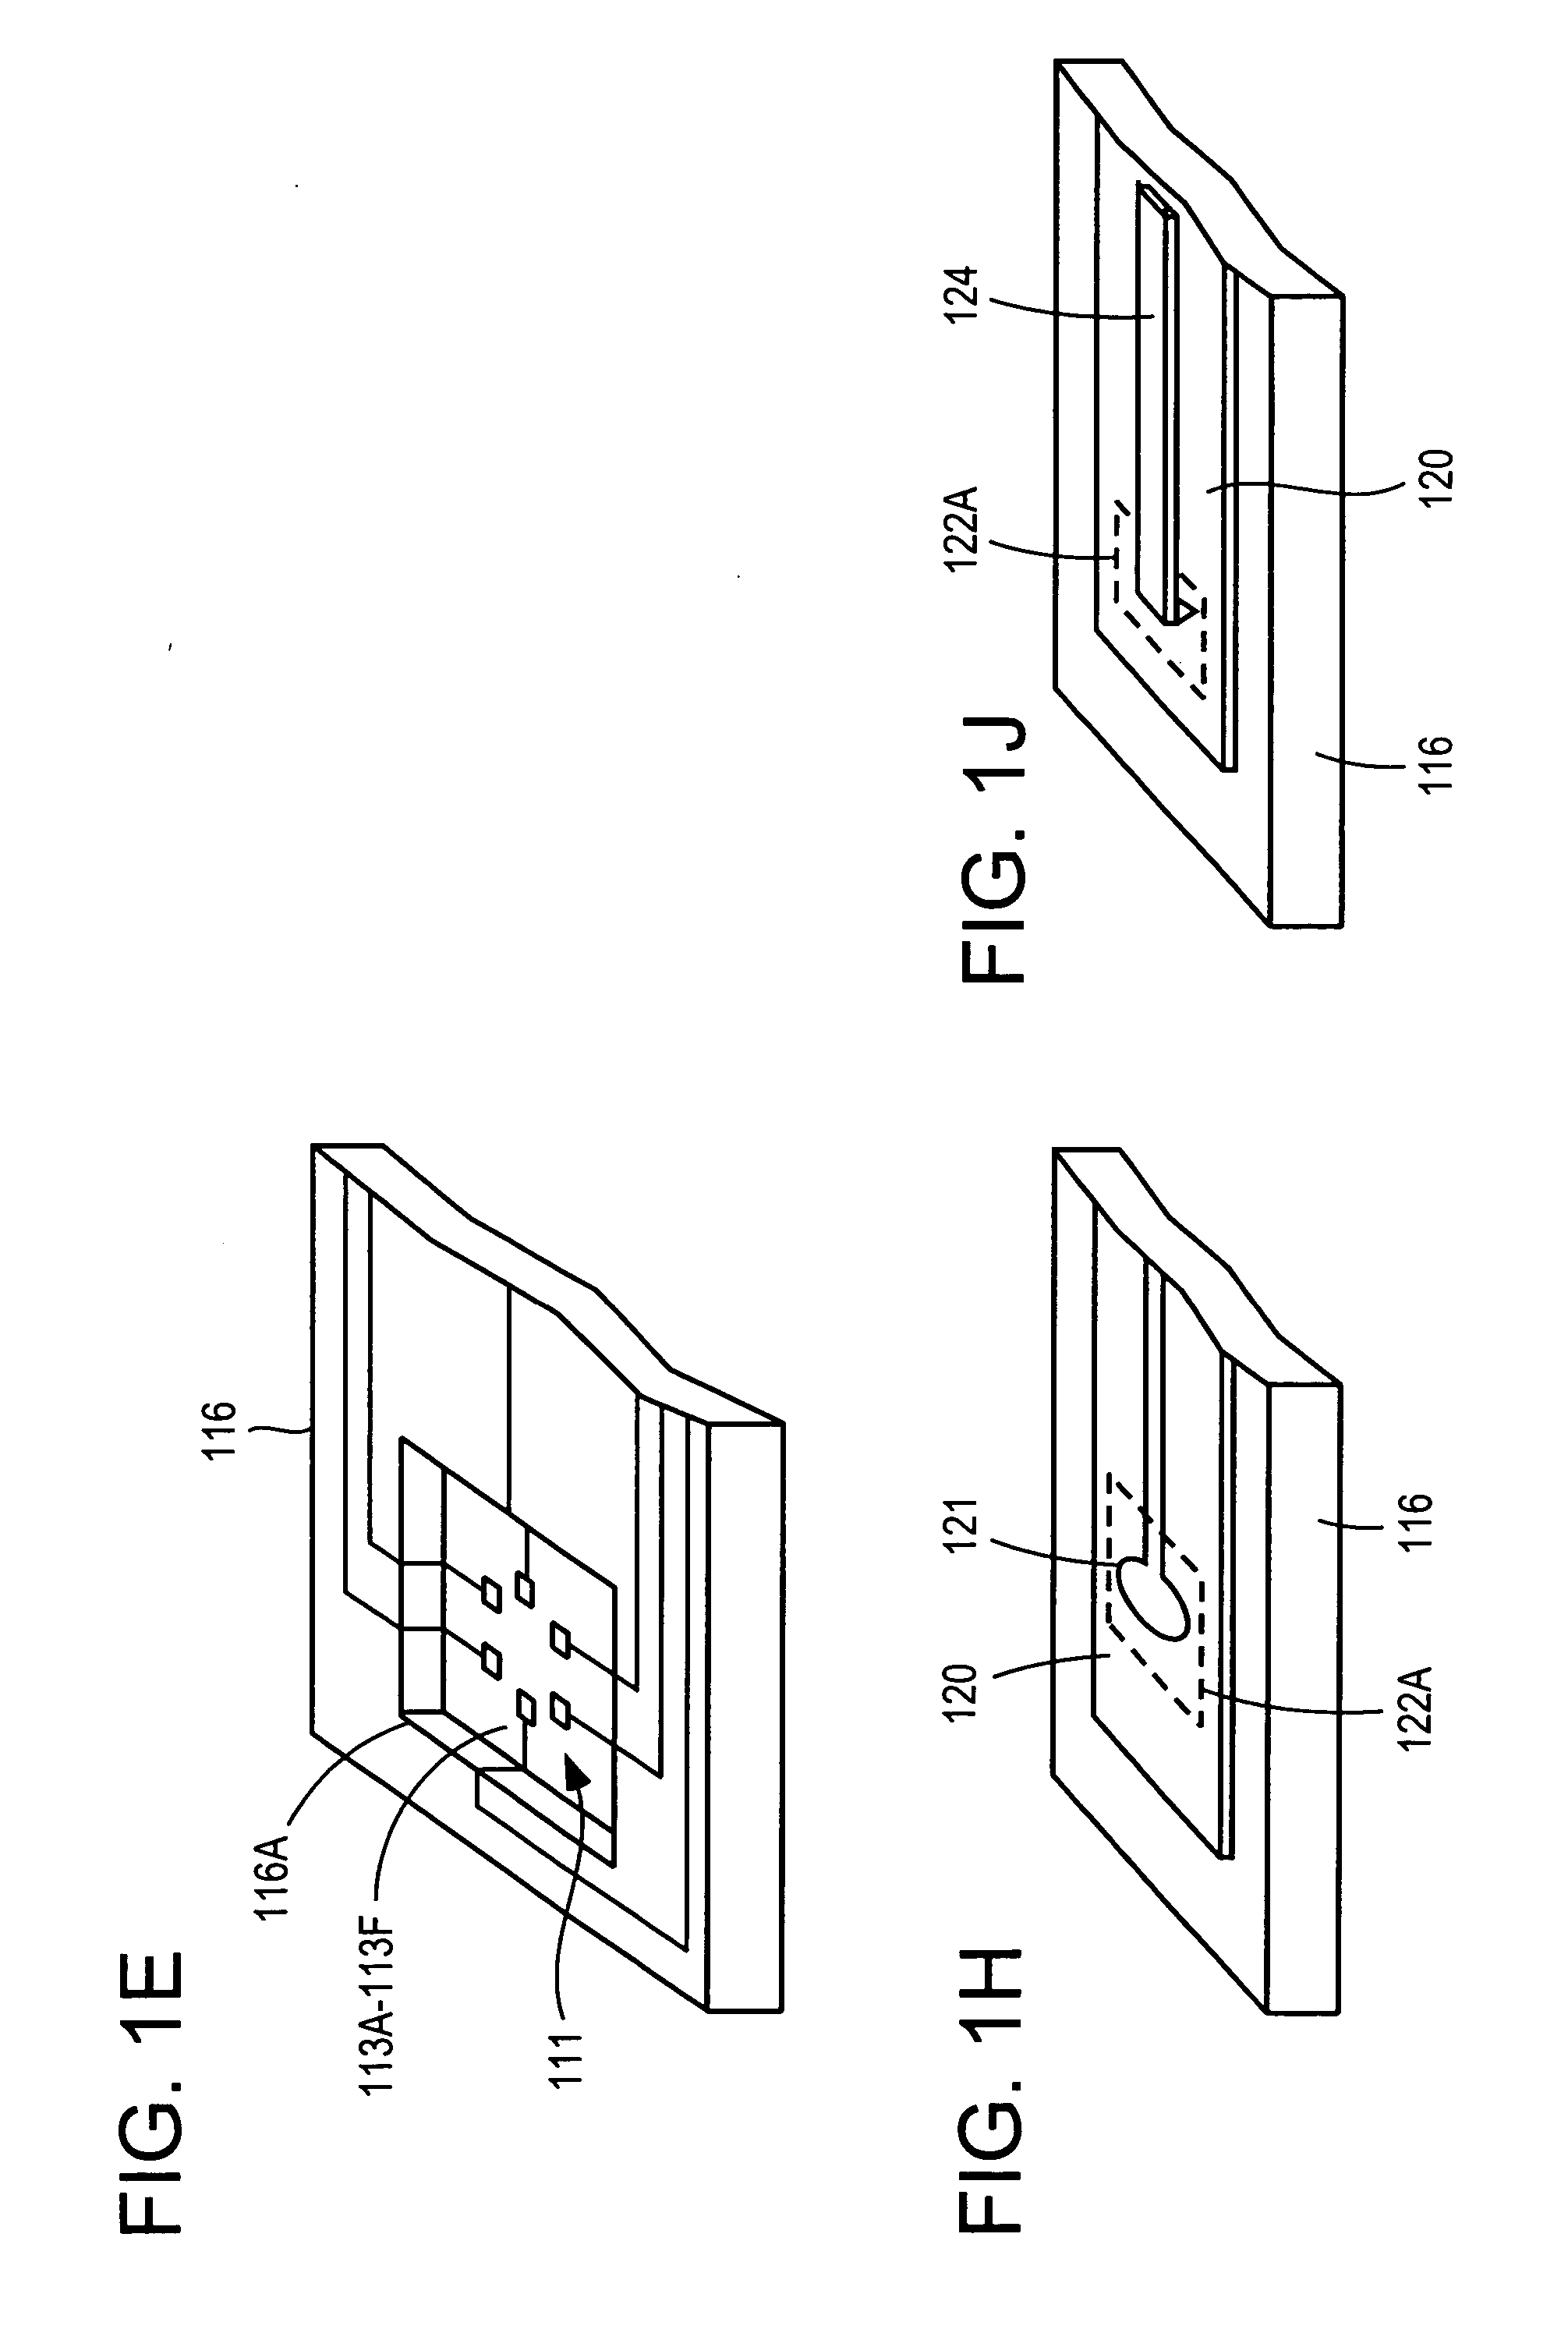 Fluid monitoring systems and methods with data communication to interested parties